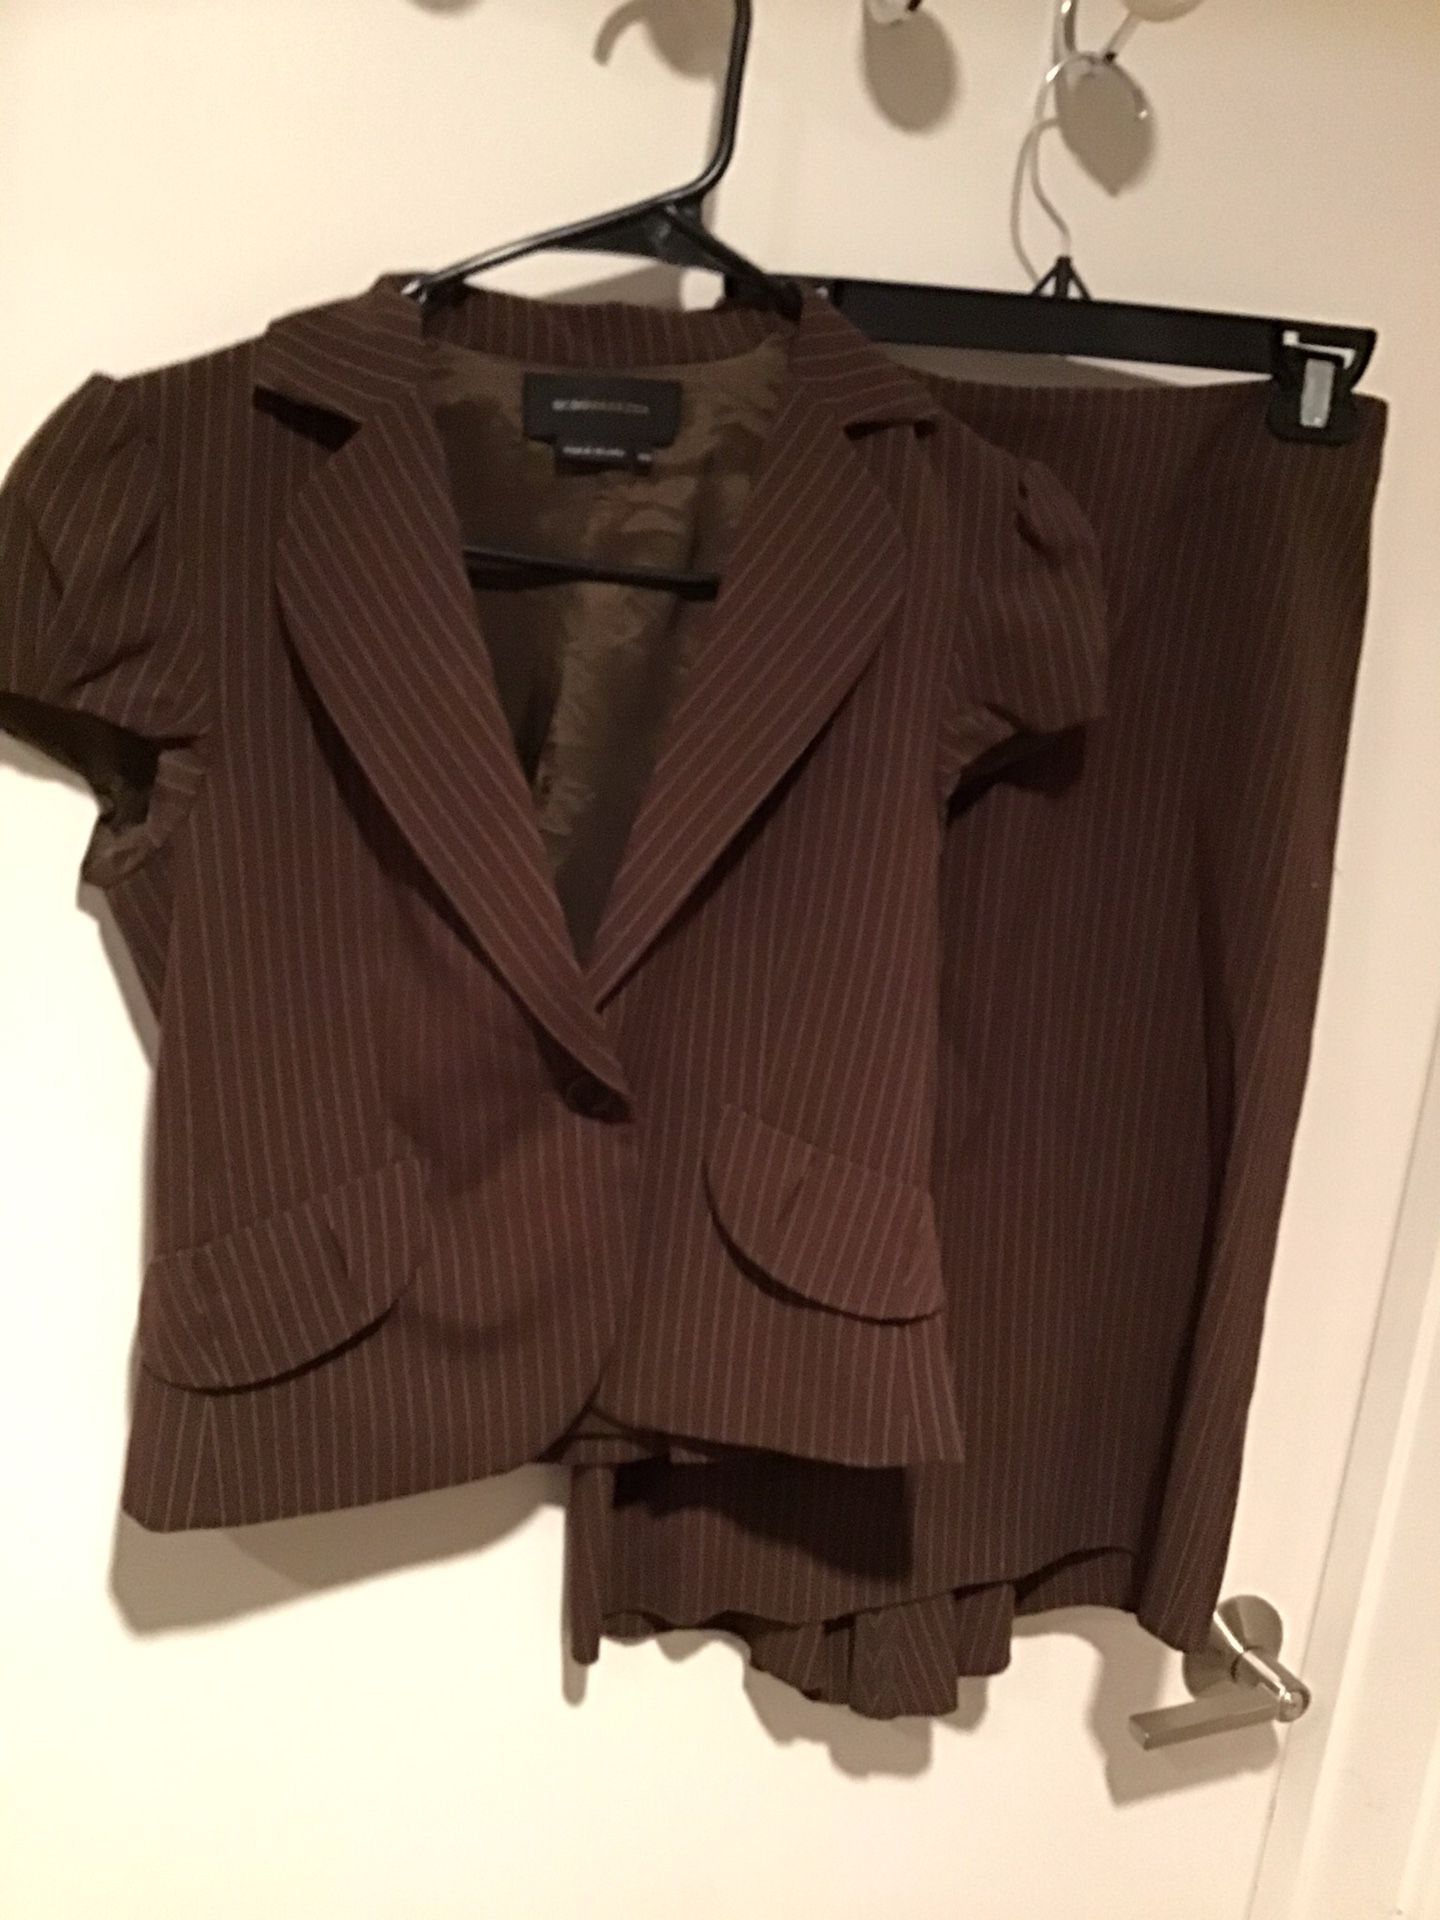 BROWN PINSTRIPE SKIRT AND JACKET SUIT